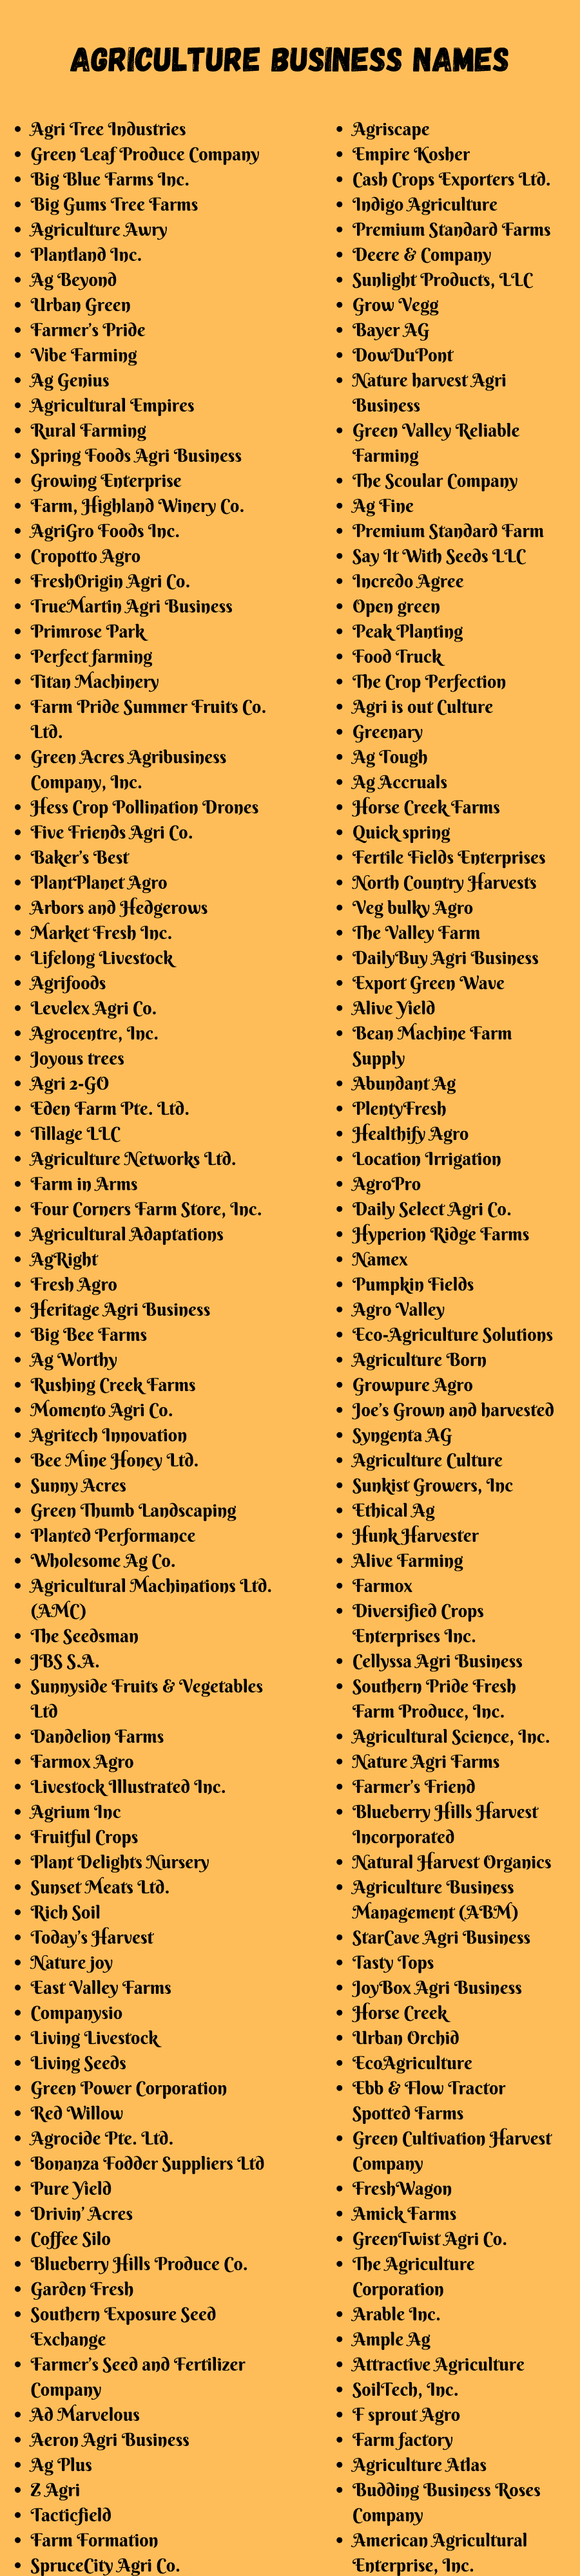 Agriculture Business Names